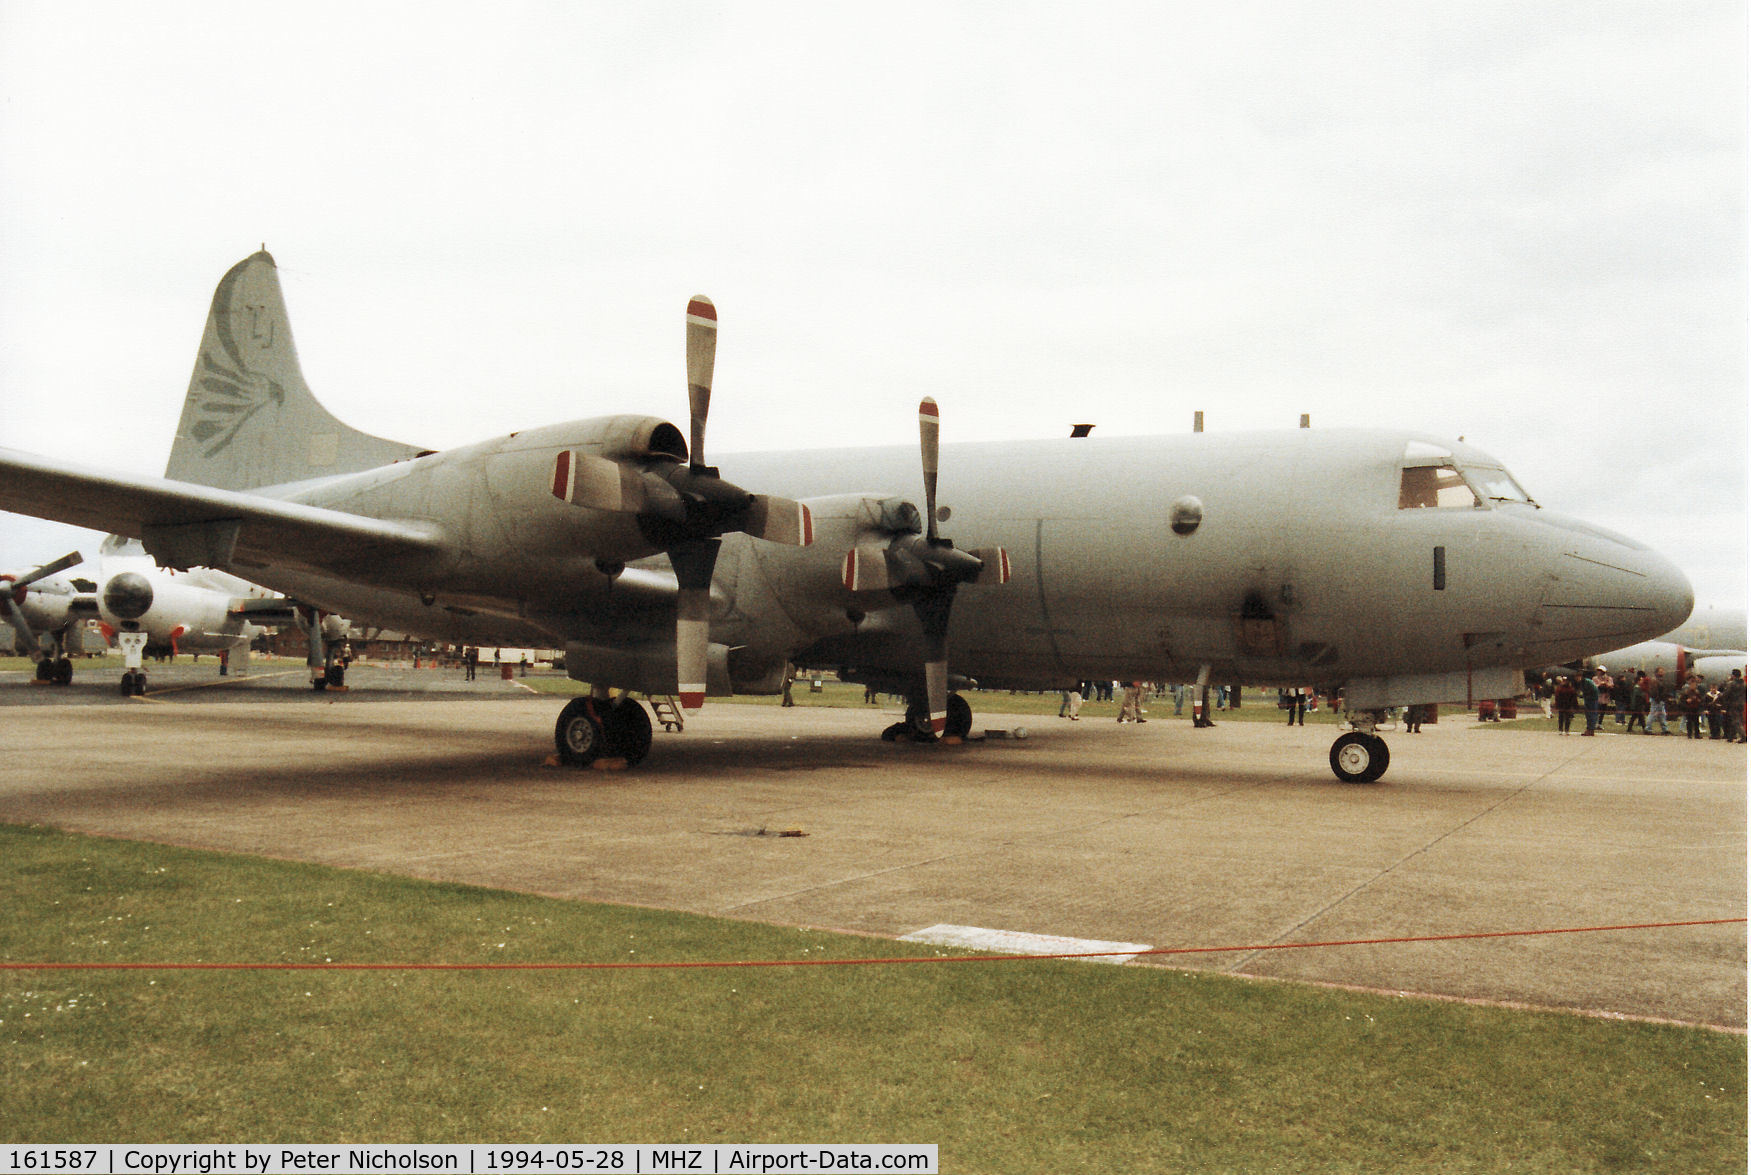 161587, Lockheed P-3C Orion C/N 285A-5759, P-3C Orion of Patrol Squadron VP-23 on display at the 1994 RAF Mildenhall Air Fete.